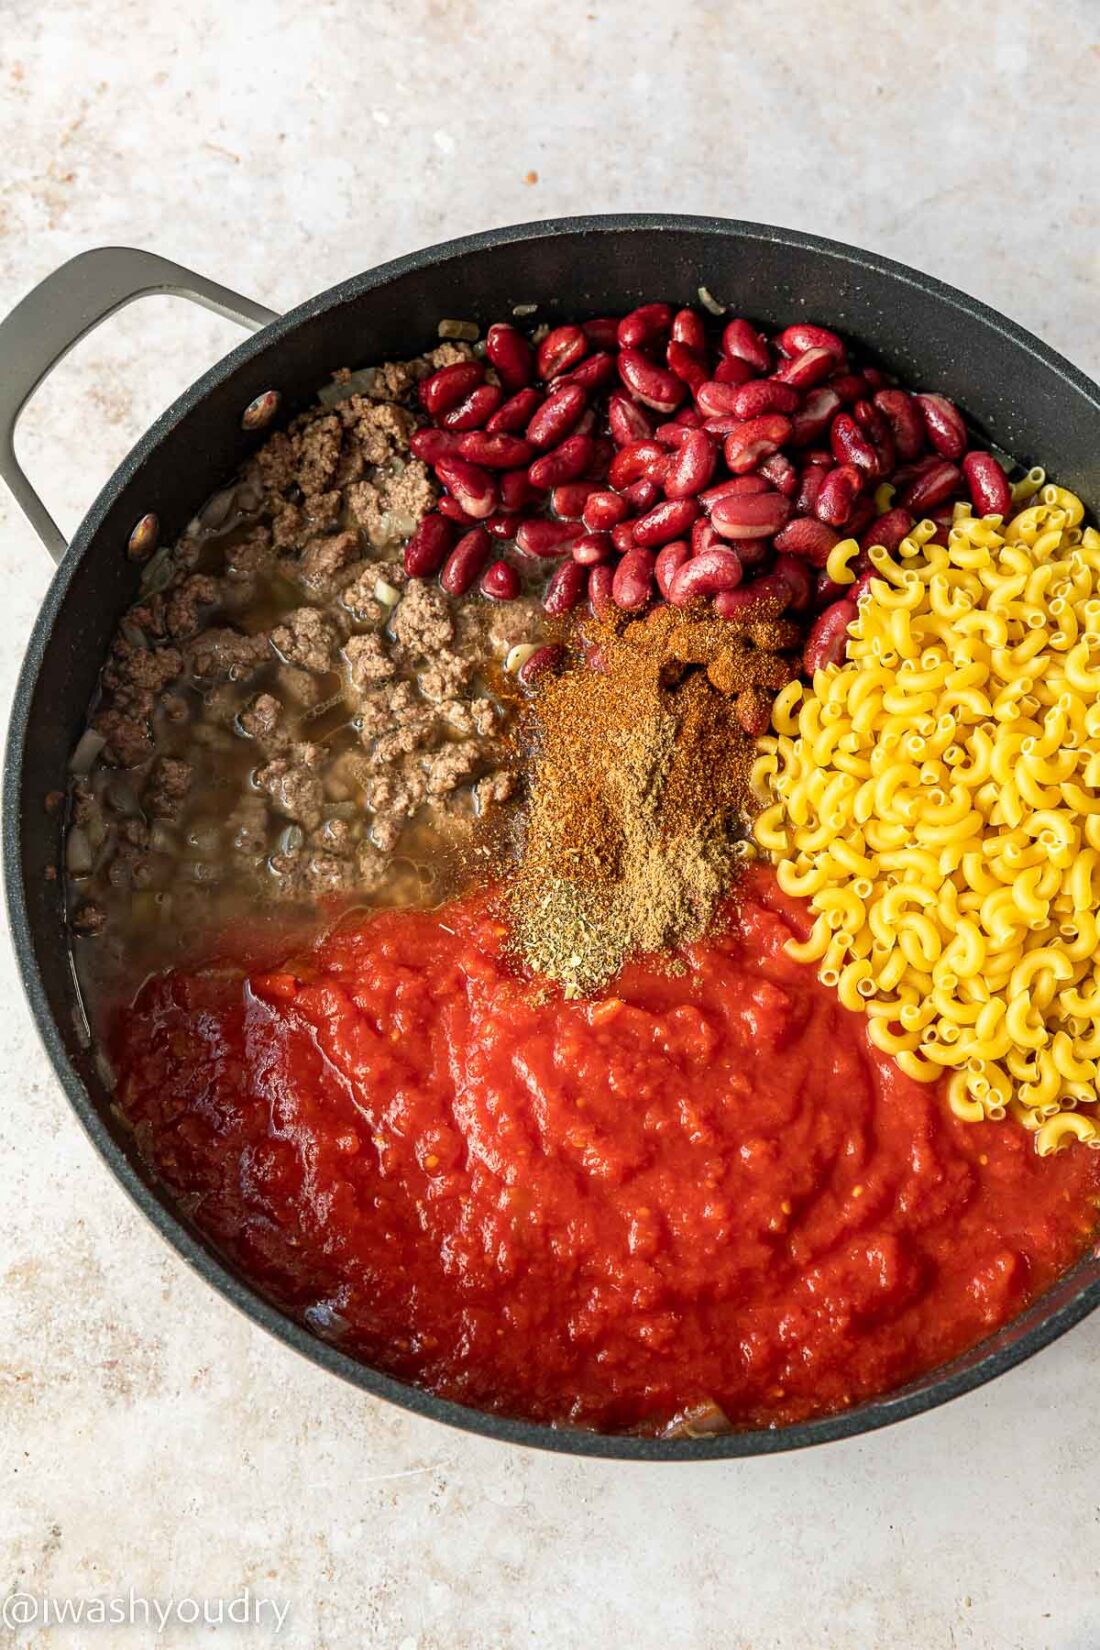 Ingredients for cheesy chili mac in skillet with dry noodles.